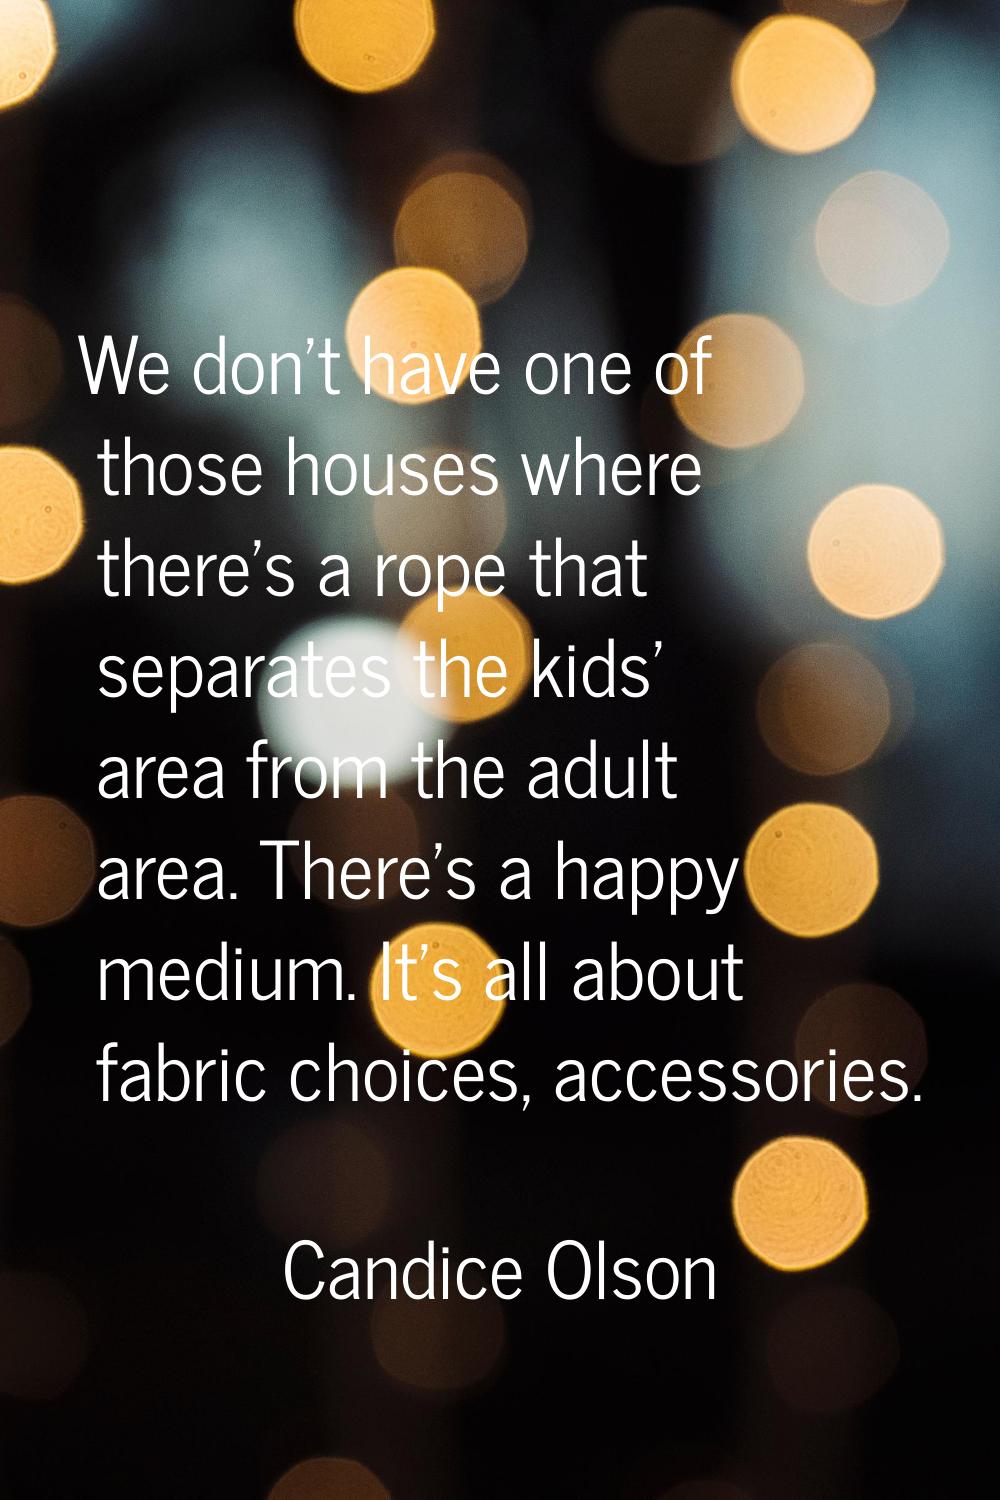 We don't have one of those houses where there's a rope that separates the kids' area from the adult